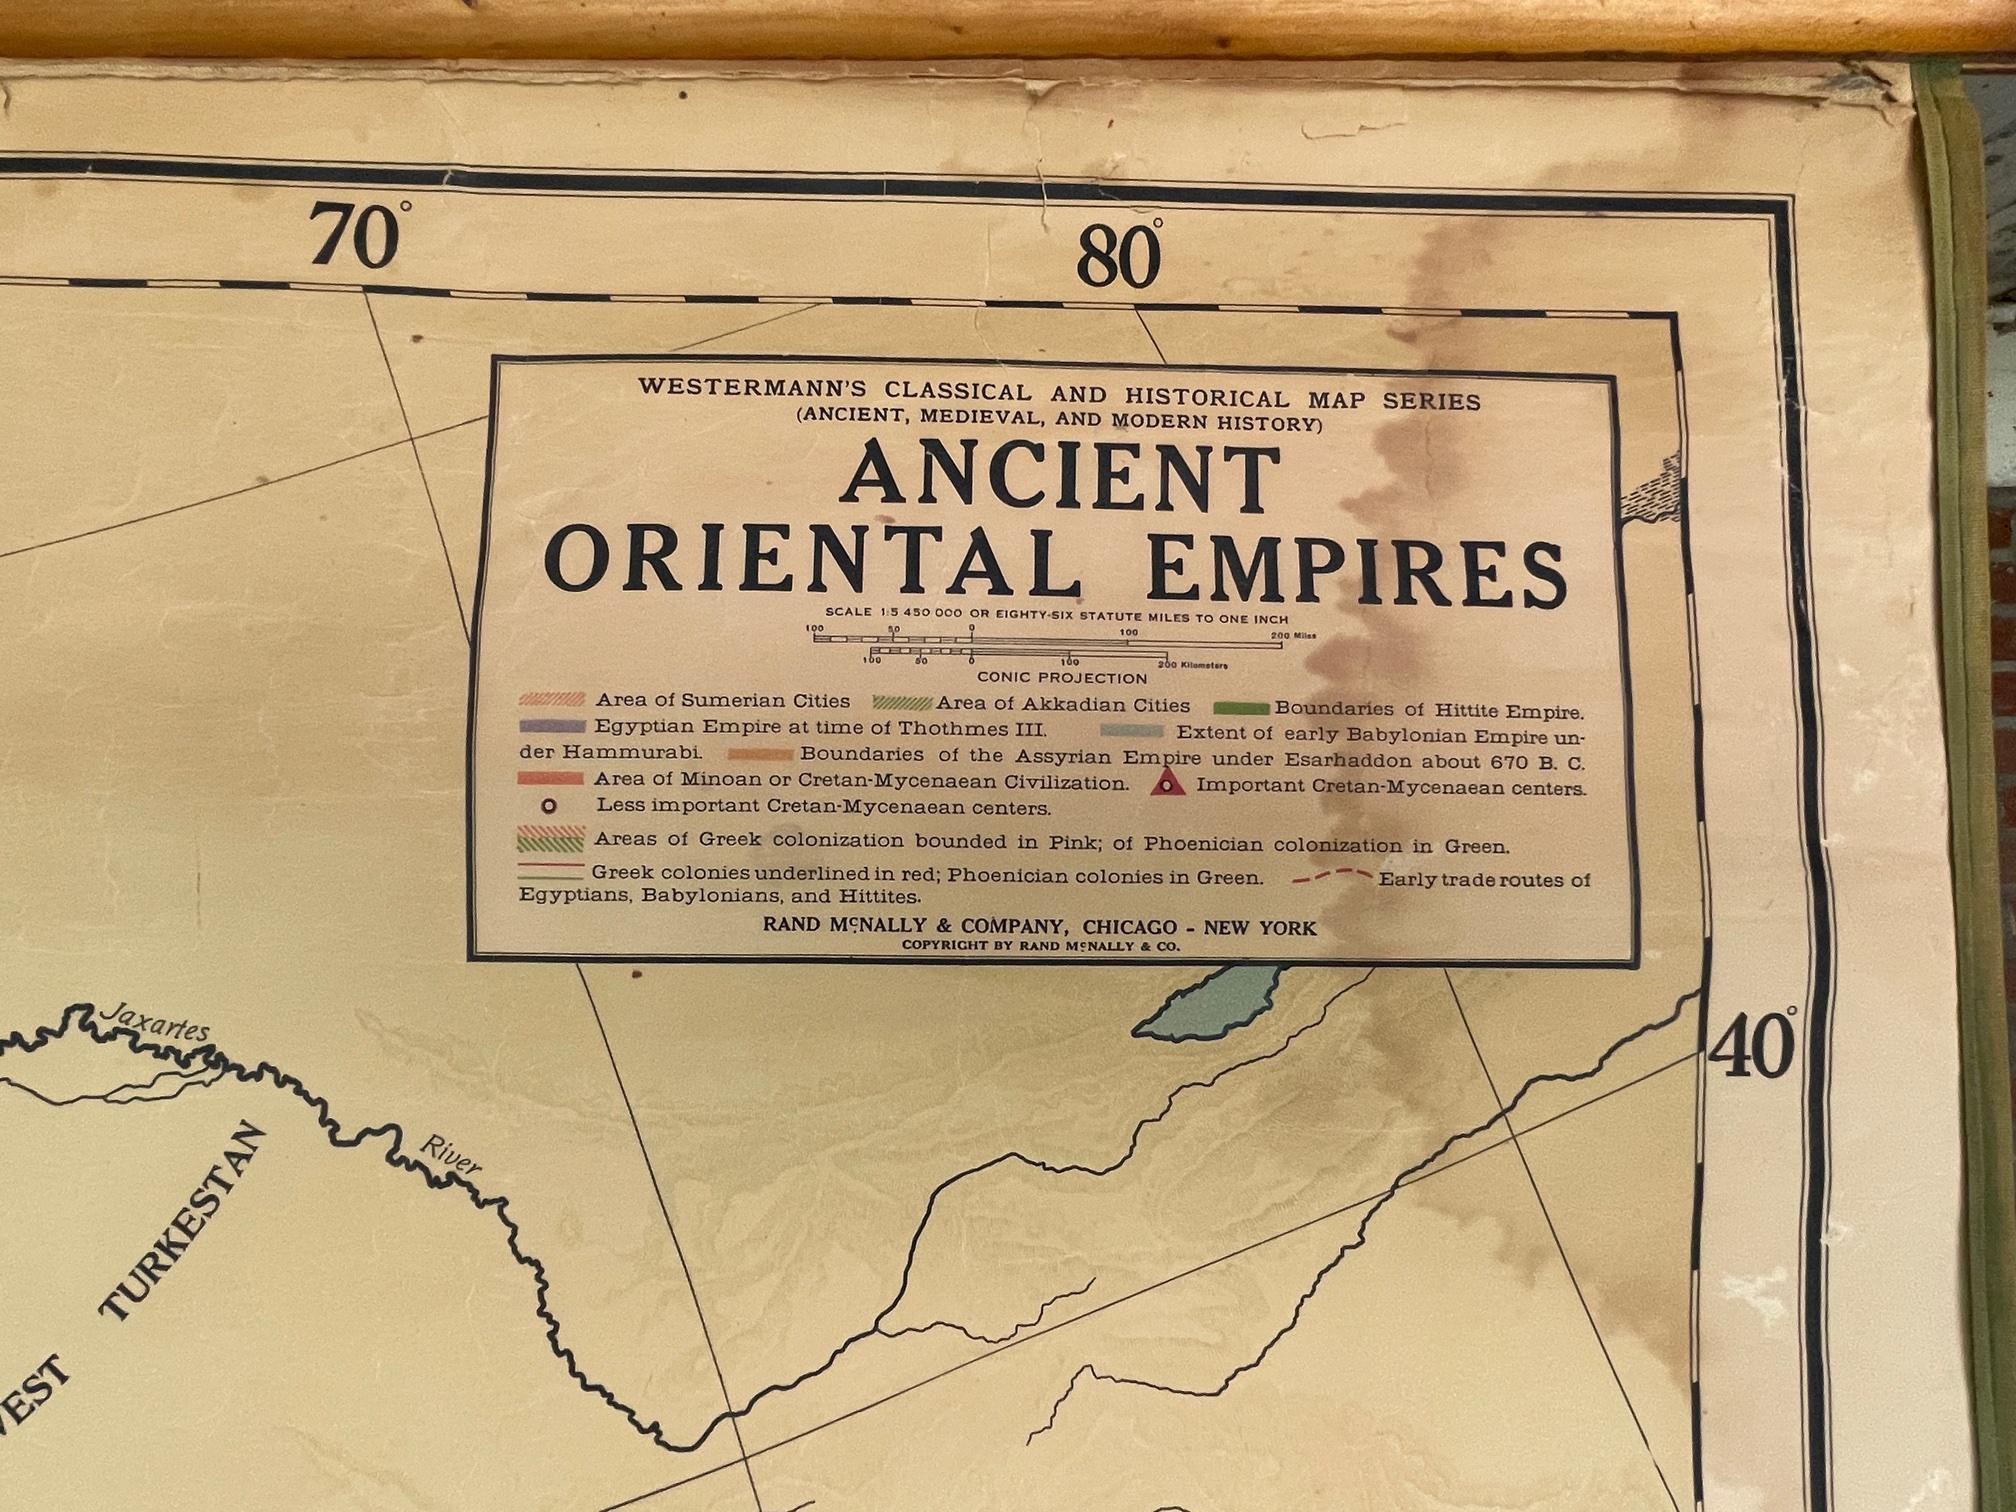 This is a real unique map made by the famous Rand McNally Company. This rare schoolmap is probably made in the late 1920's. The map of all the Ancient Oriental Empires shows the world as it was ruled during the time of the Greek and Romans etc. The